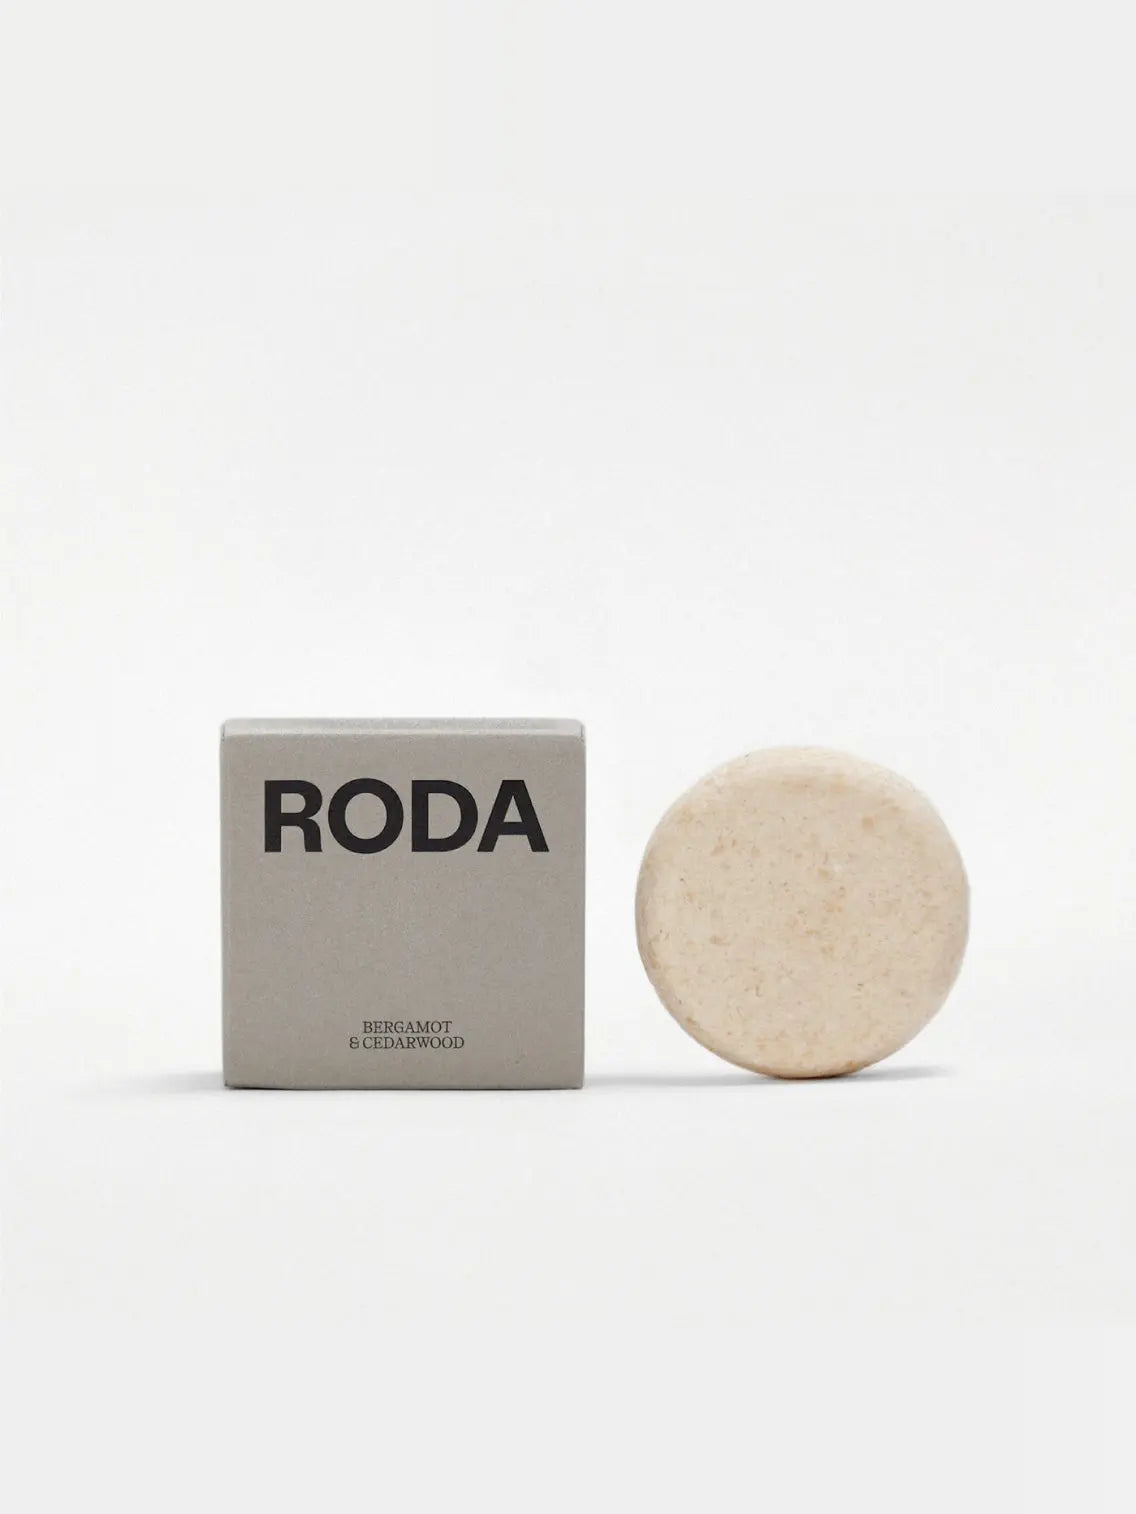 A round, beige shampoo bar stands next to a rectangular gray box labeled "Roda". The box has black text and indicates the bar's scent as "Bergamot & Cedarwood" on a white background. This elegant product is available at your local Barcelona store, Bassalstore.